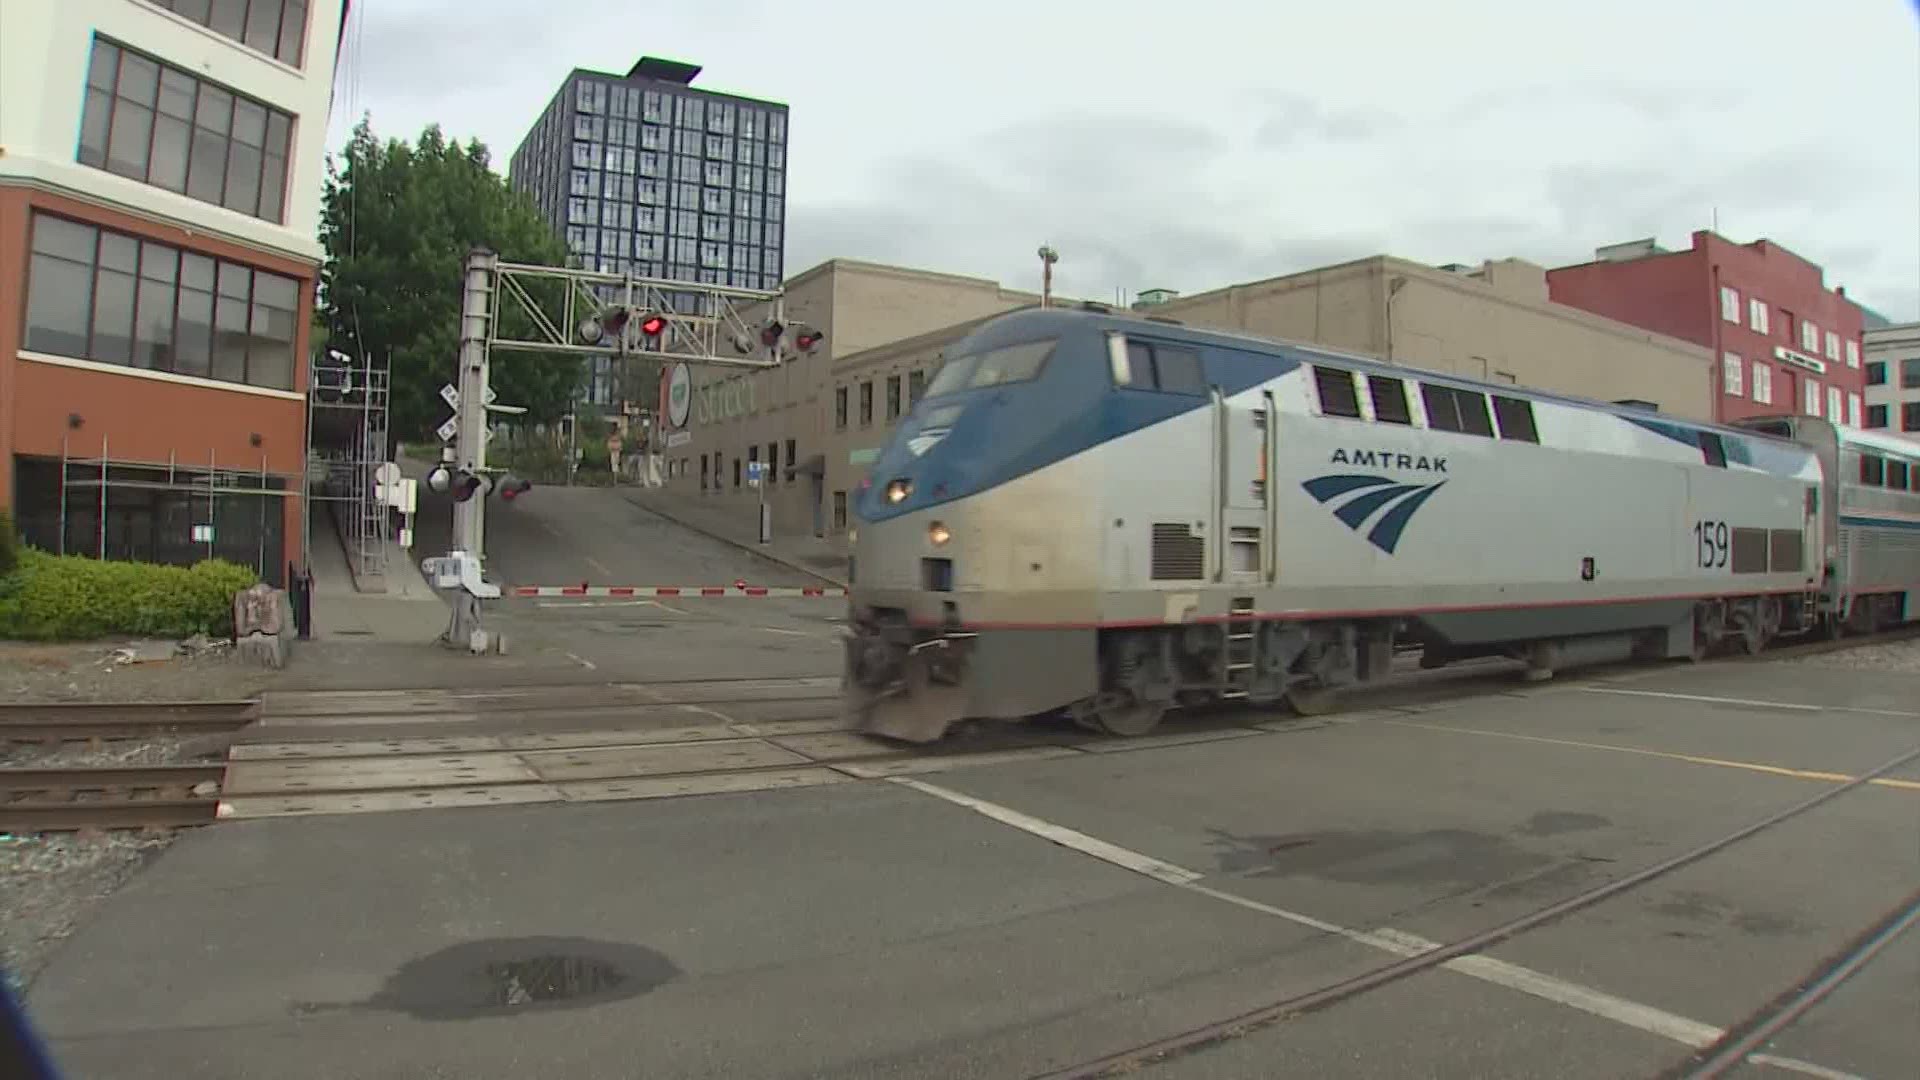 Amtrak restored service on long-distance routes serving Washington on Monday, ahead of what is expected to be a busy Memorial Day travel weekend.